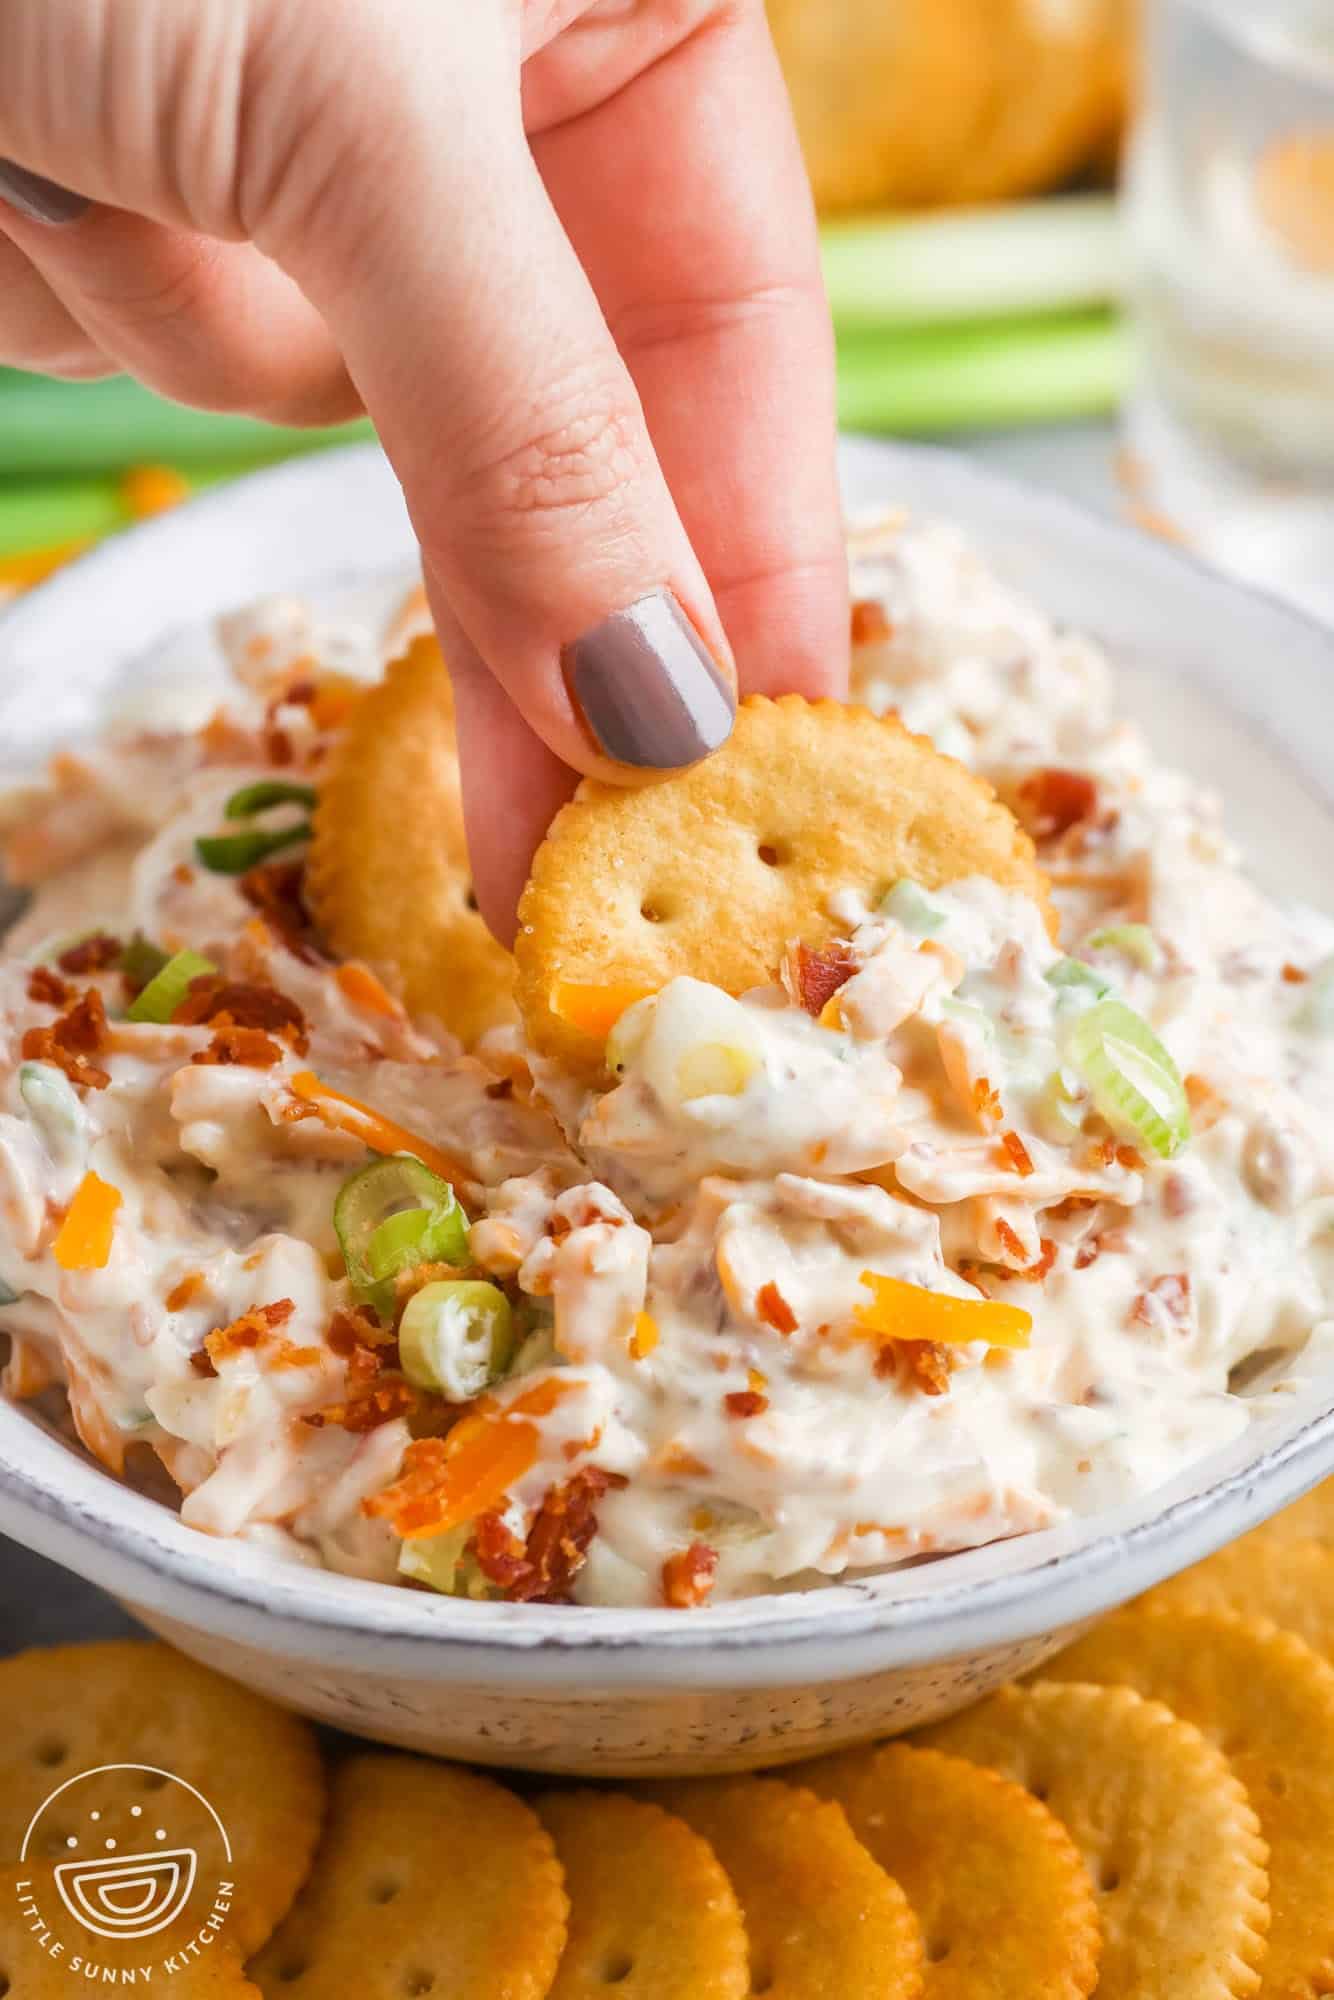 a bowl of creamy dip with cheese, bacon, green onions and almonds. A hand is dipping two ritz crackers into the bowl.